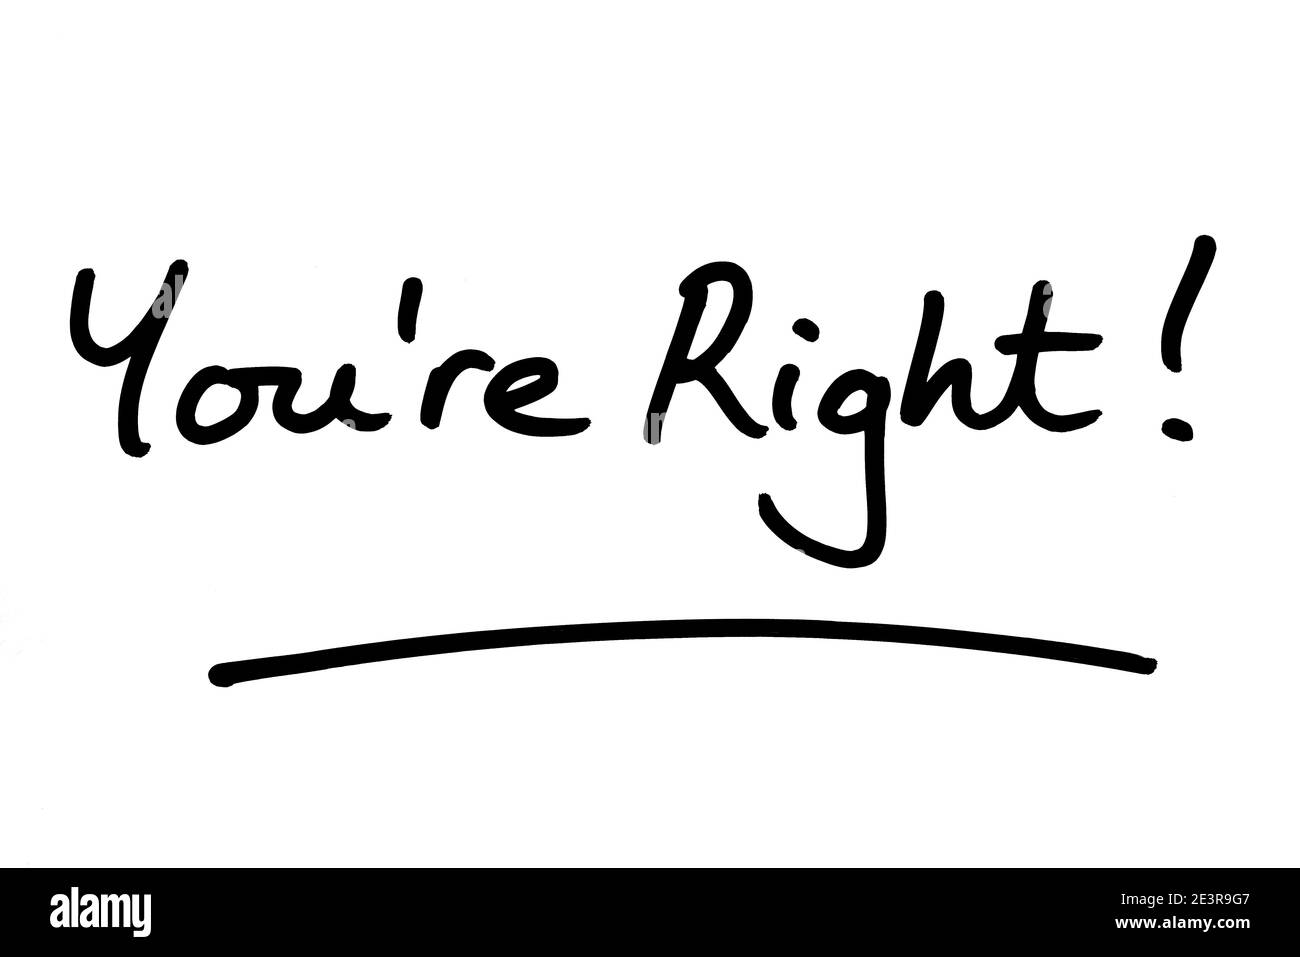 Youre Right! handwritten on a white background. Stock Photo